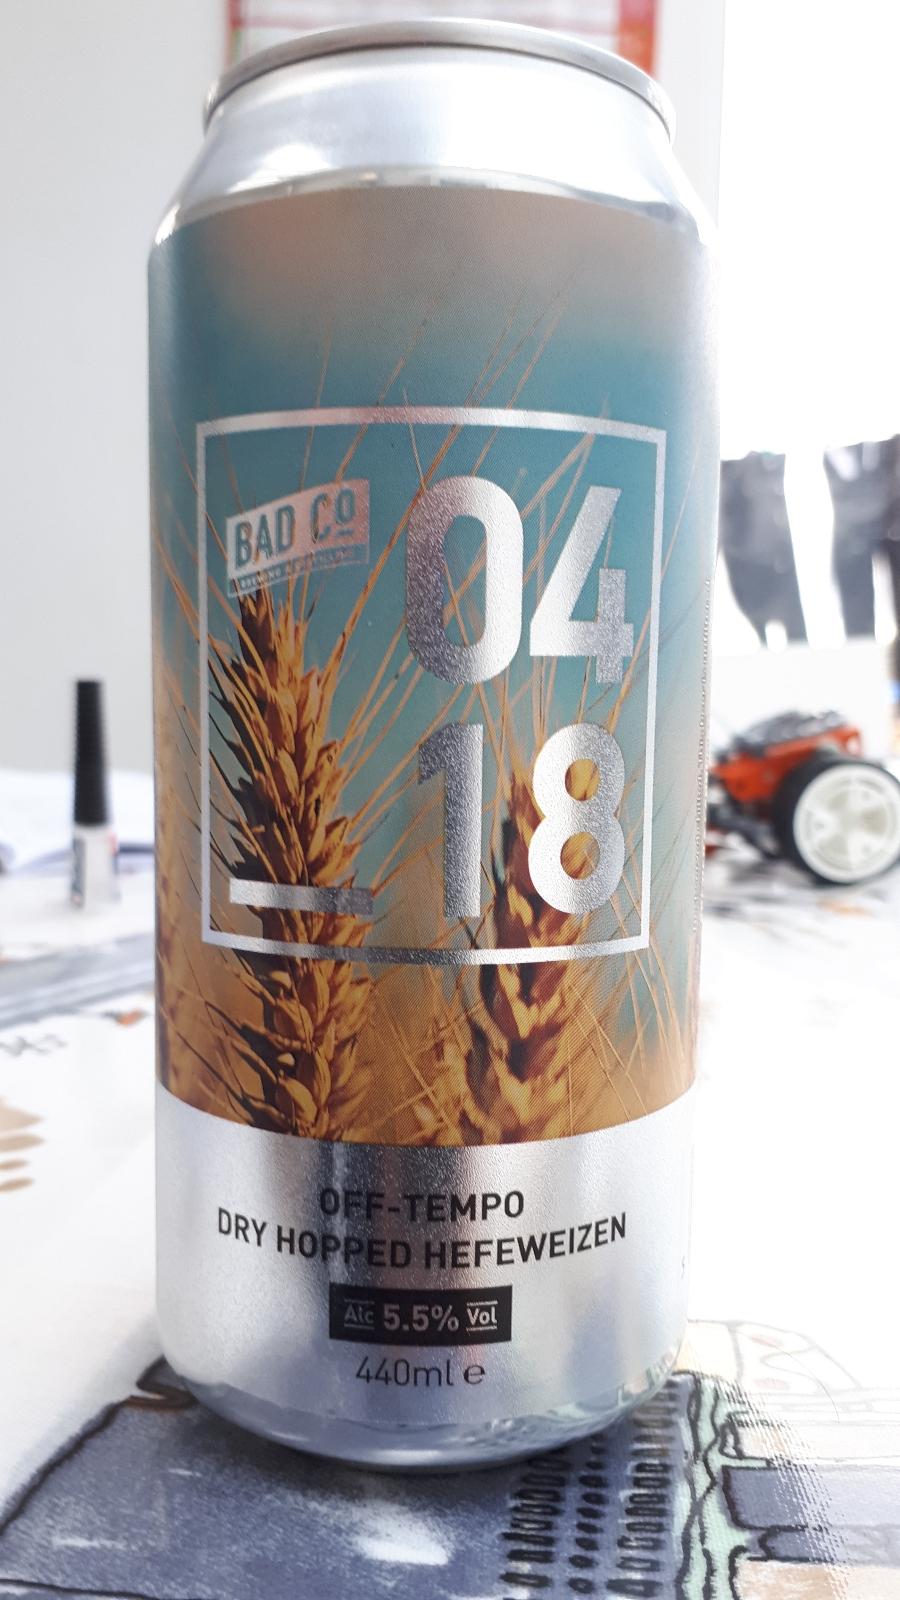 04_18 Off-Tempo Dry Hopped Hefeweizen